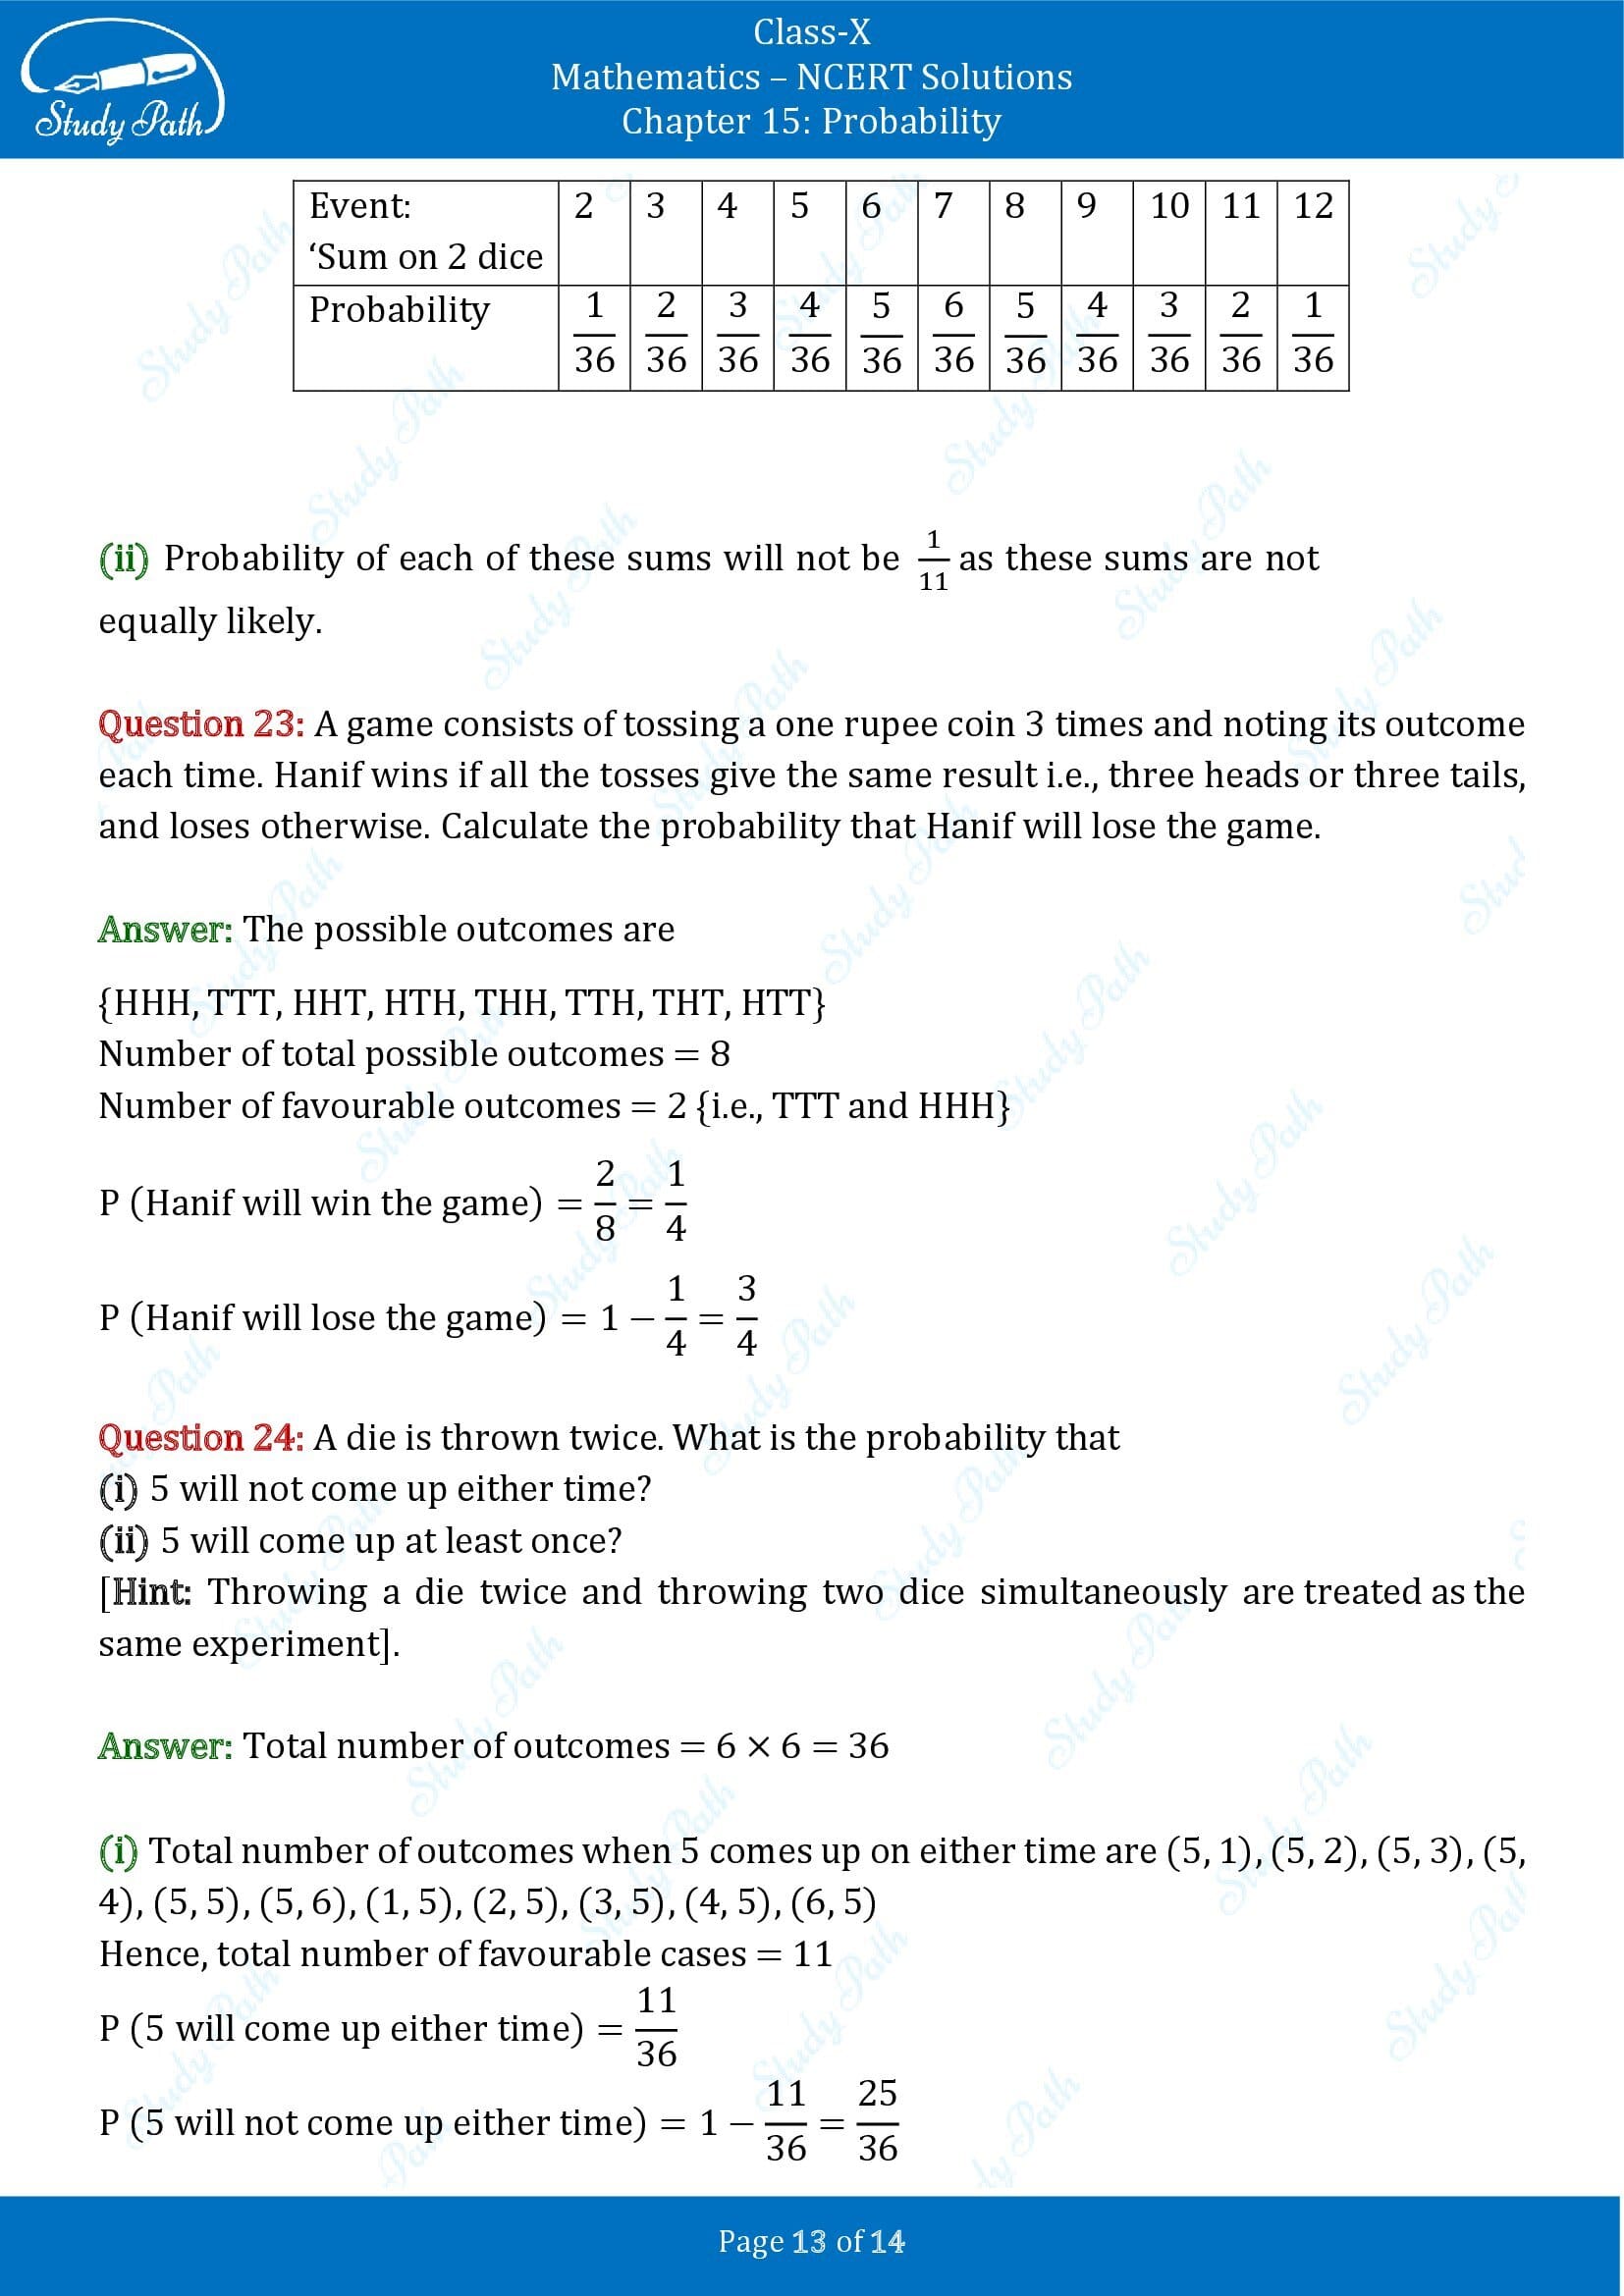 NCERT Solutions for Class 10 Maths Chapter 15 Probability Exercise 15.1 00013